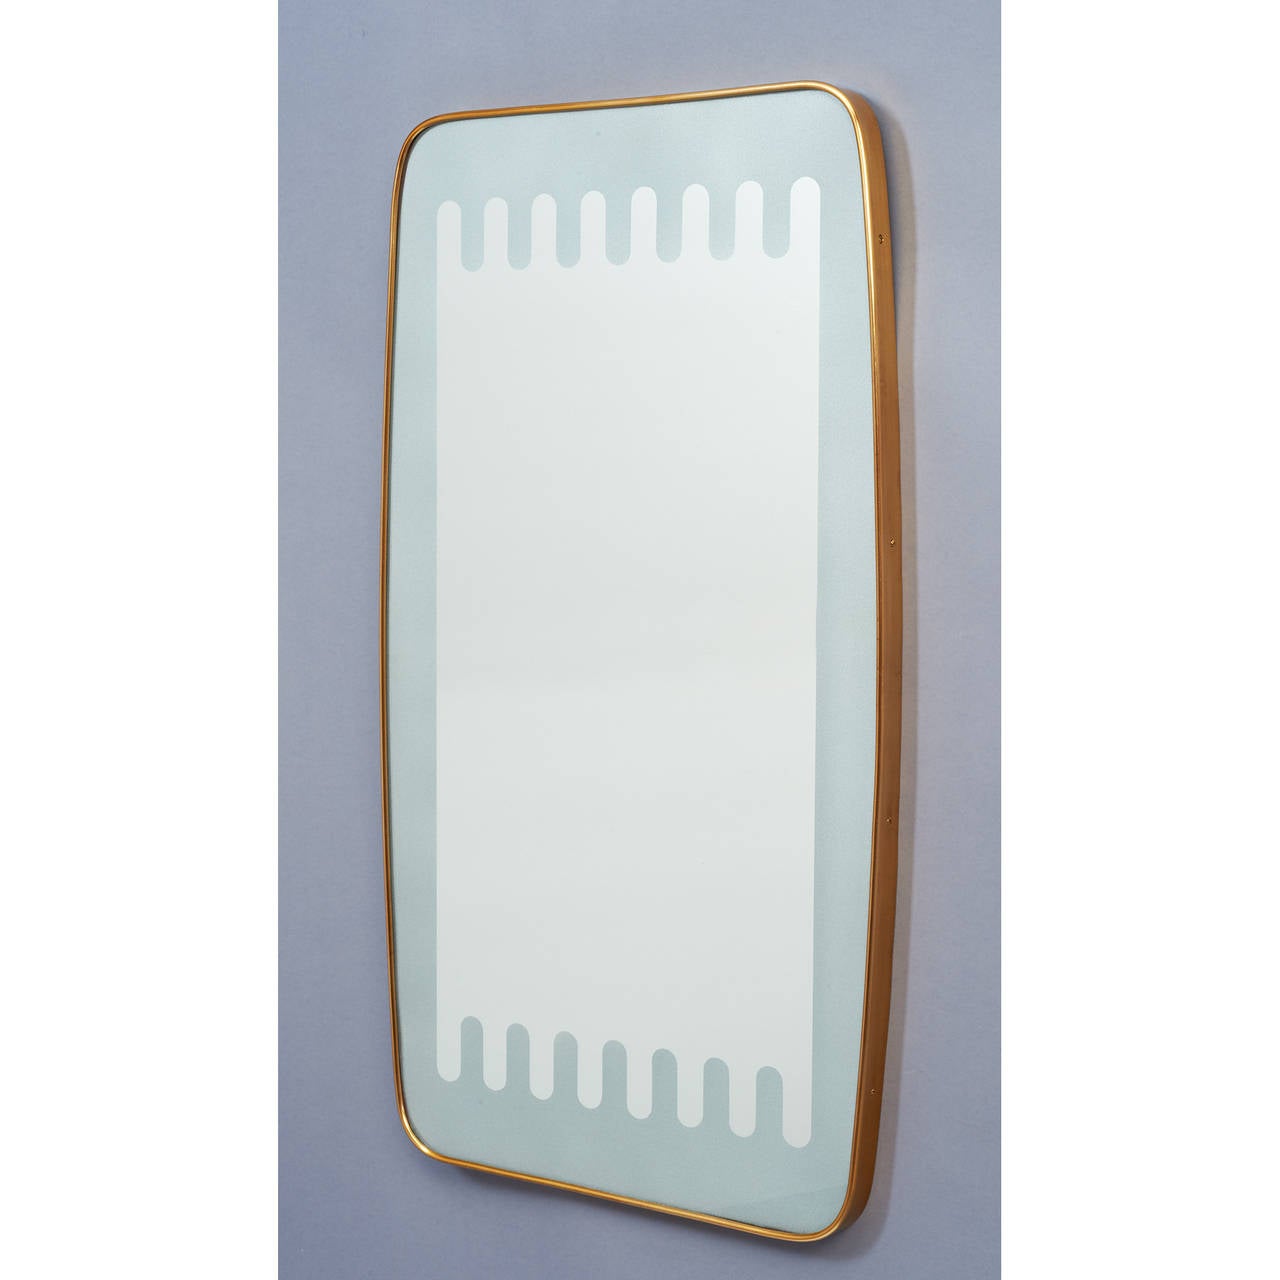 Italy, 1950s

Mirror with frosted wave motif
Brass frame with gently bowed sides

38 x 21.5